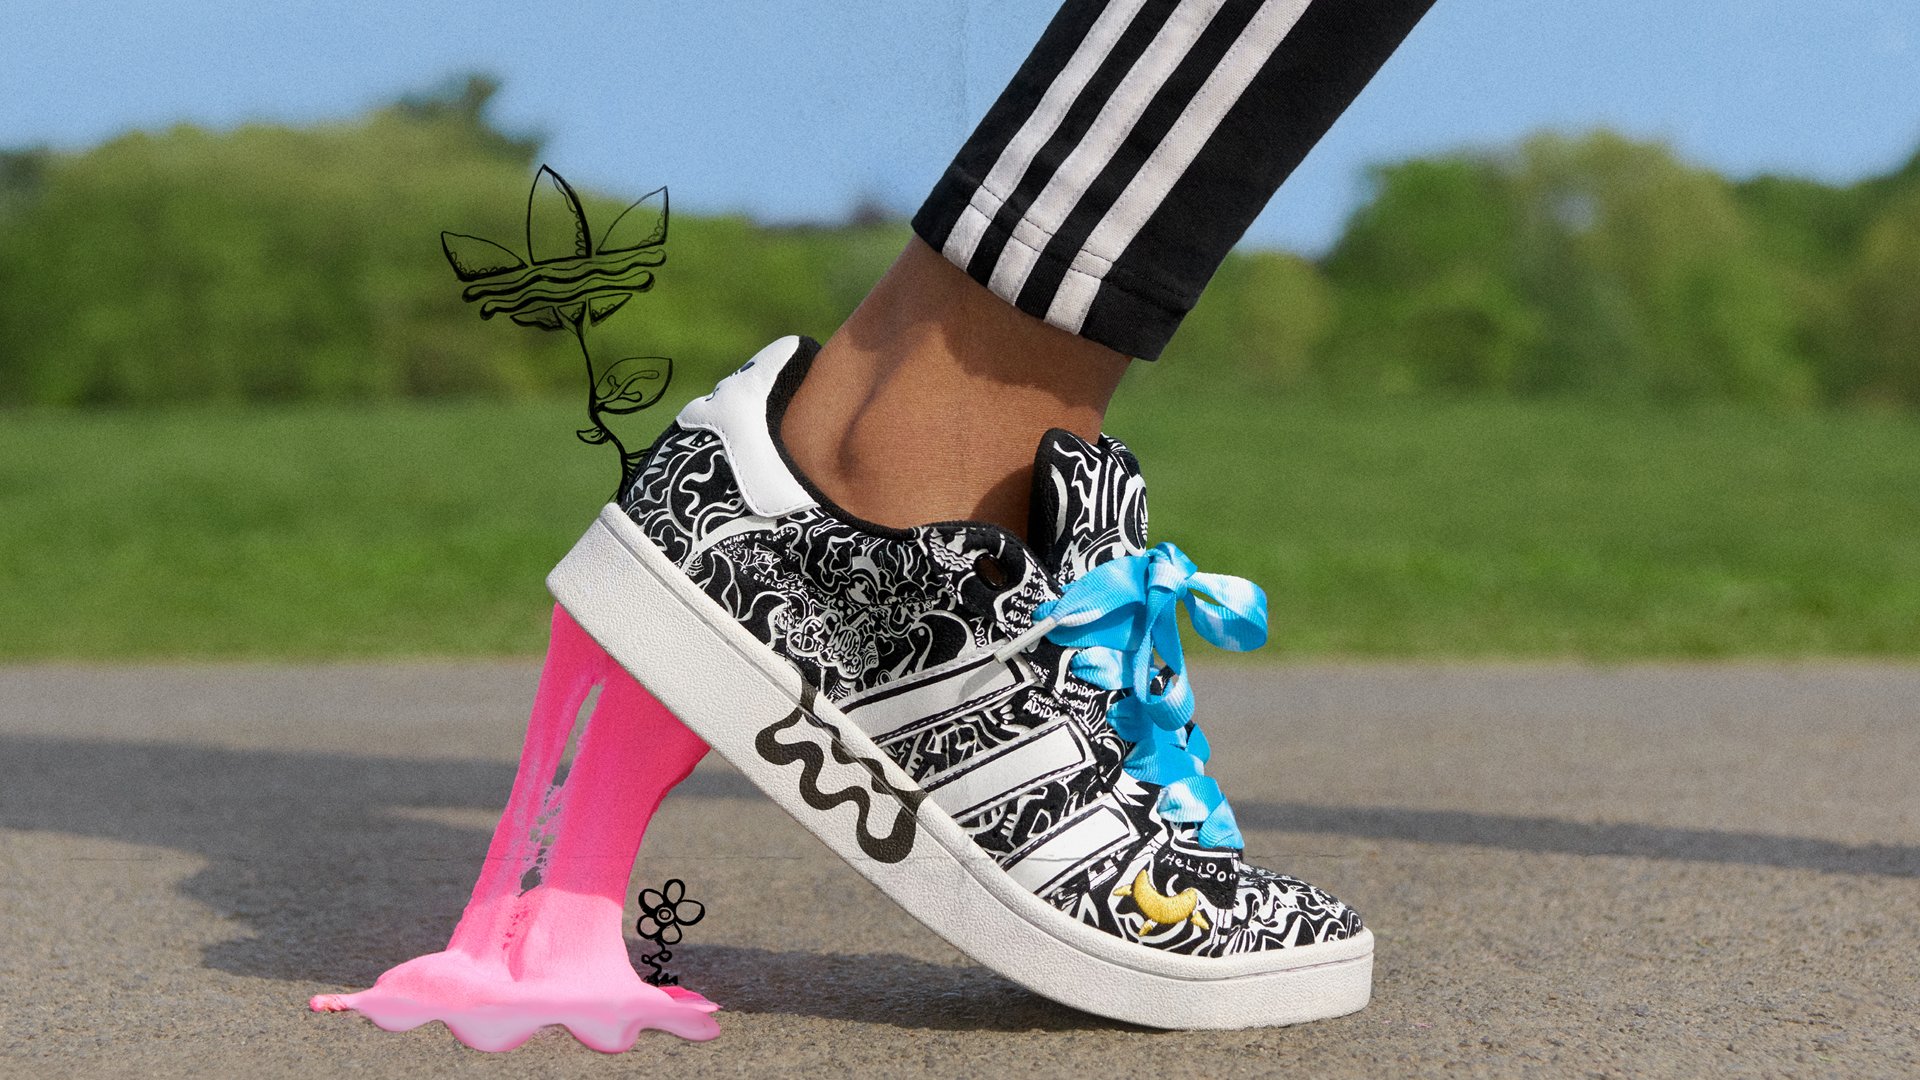 FEWOCiOUS’ Signature Style Takes Center Stage in adidas Originals Collaboration